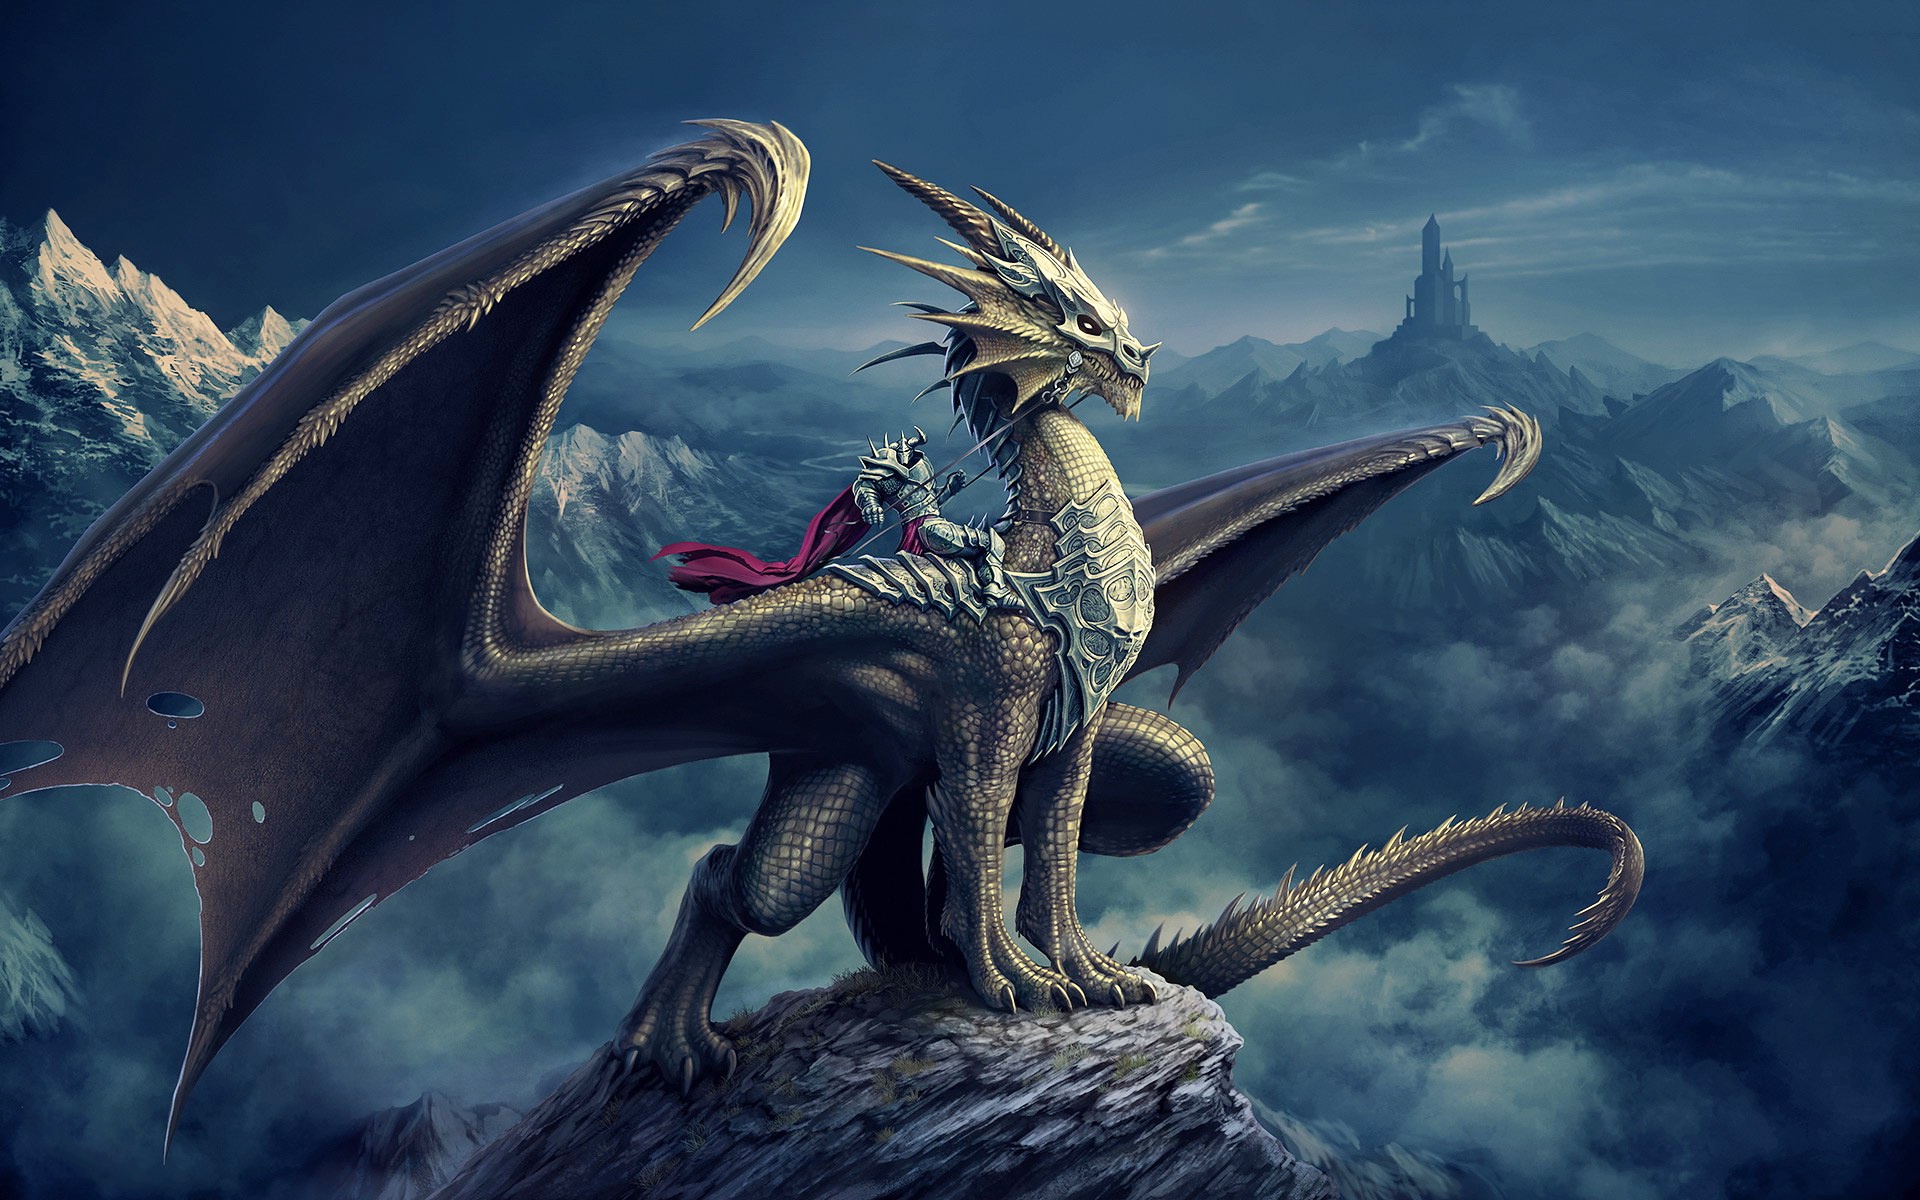 2014 Wallpapers Dragon HD Wallpapers Steam Train HD Wallpapers Dragon